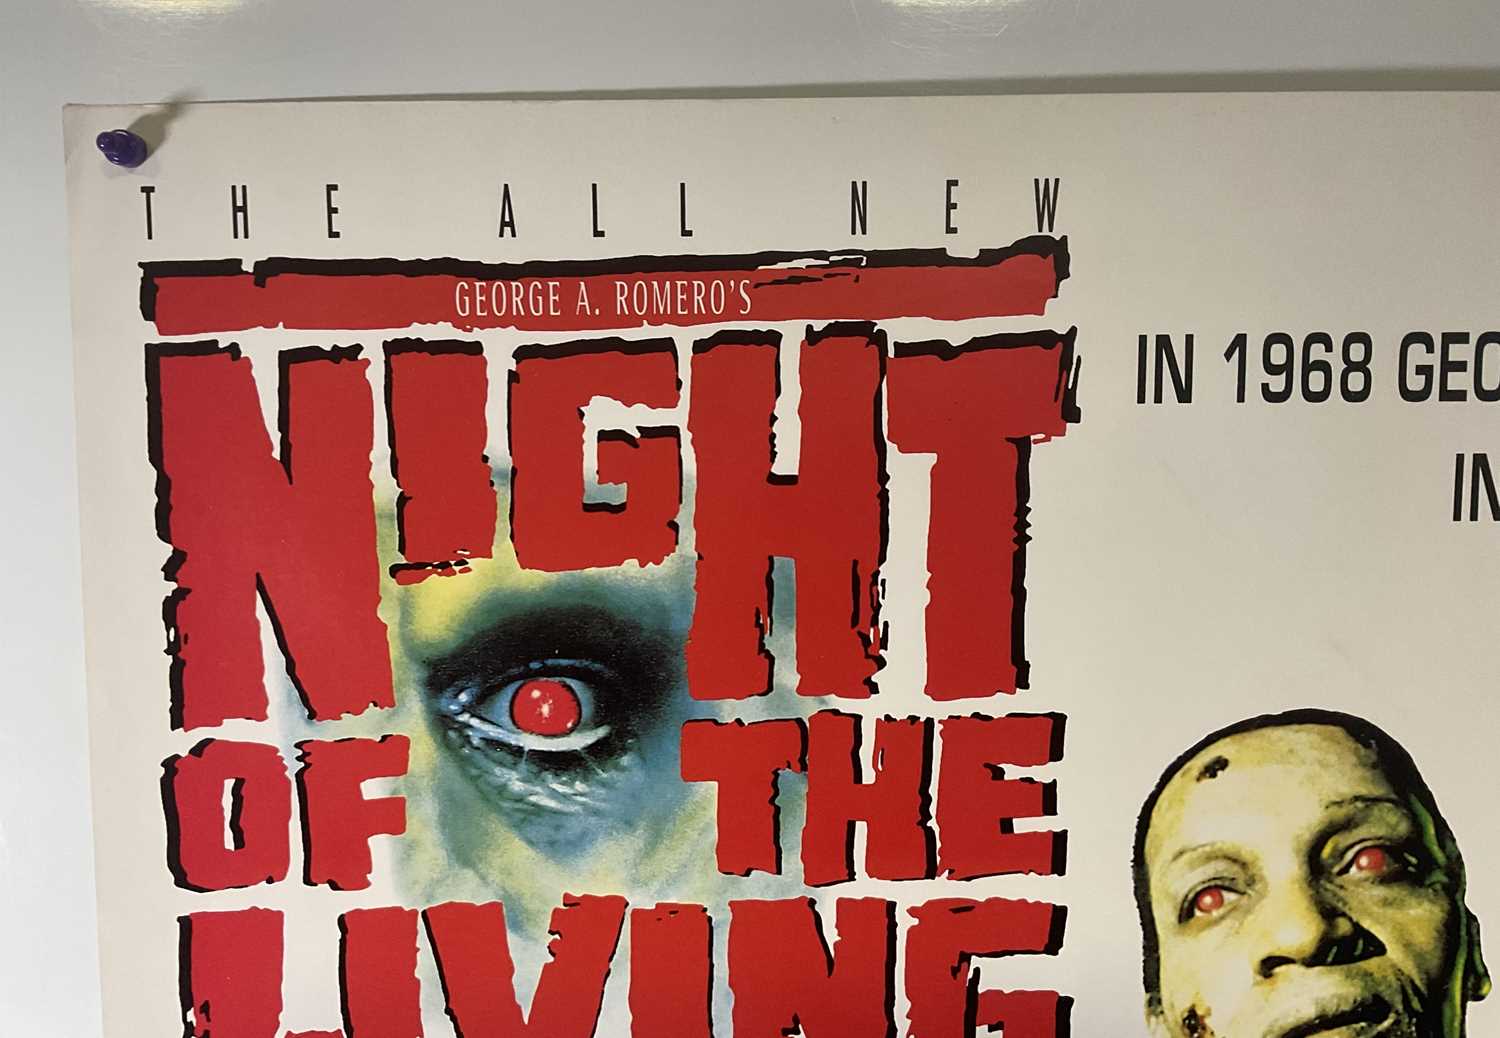 NIGHT OF THE LIVING DEAD (1993) UK Quad film poster, rolled - Image 3 of 6